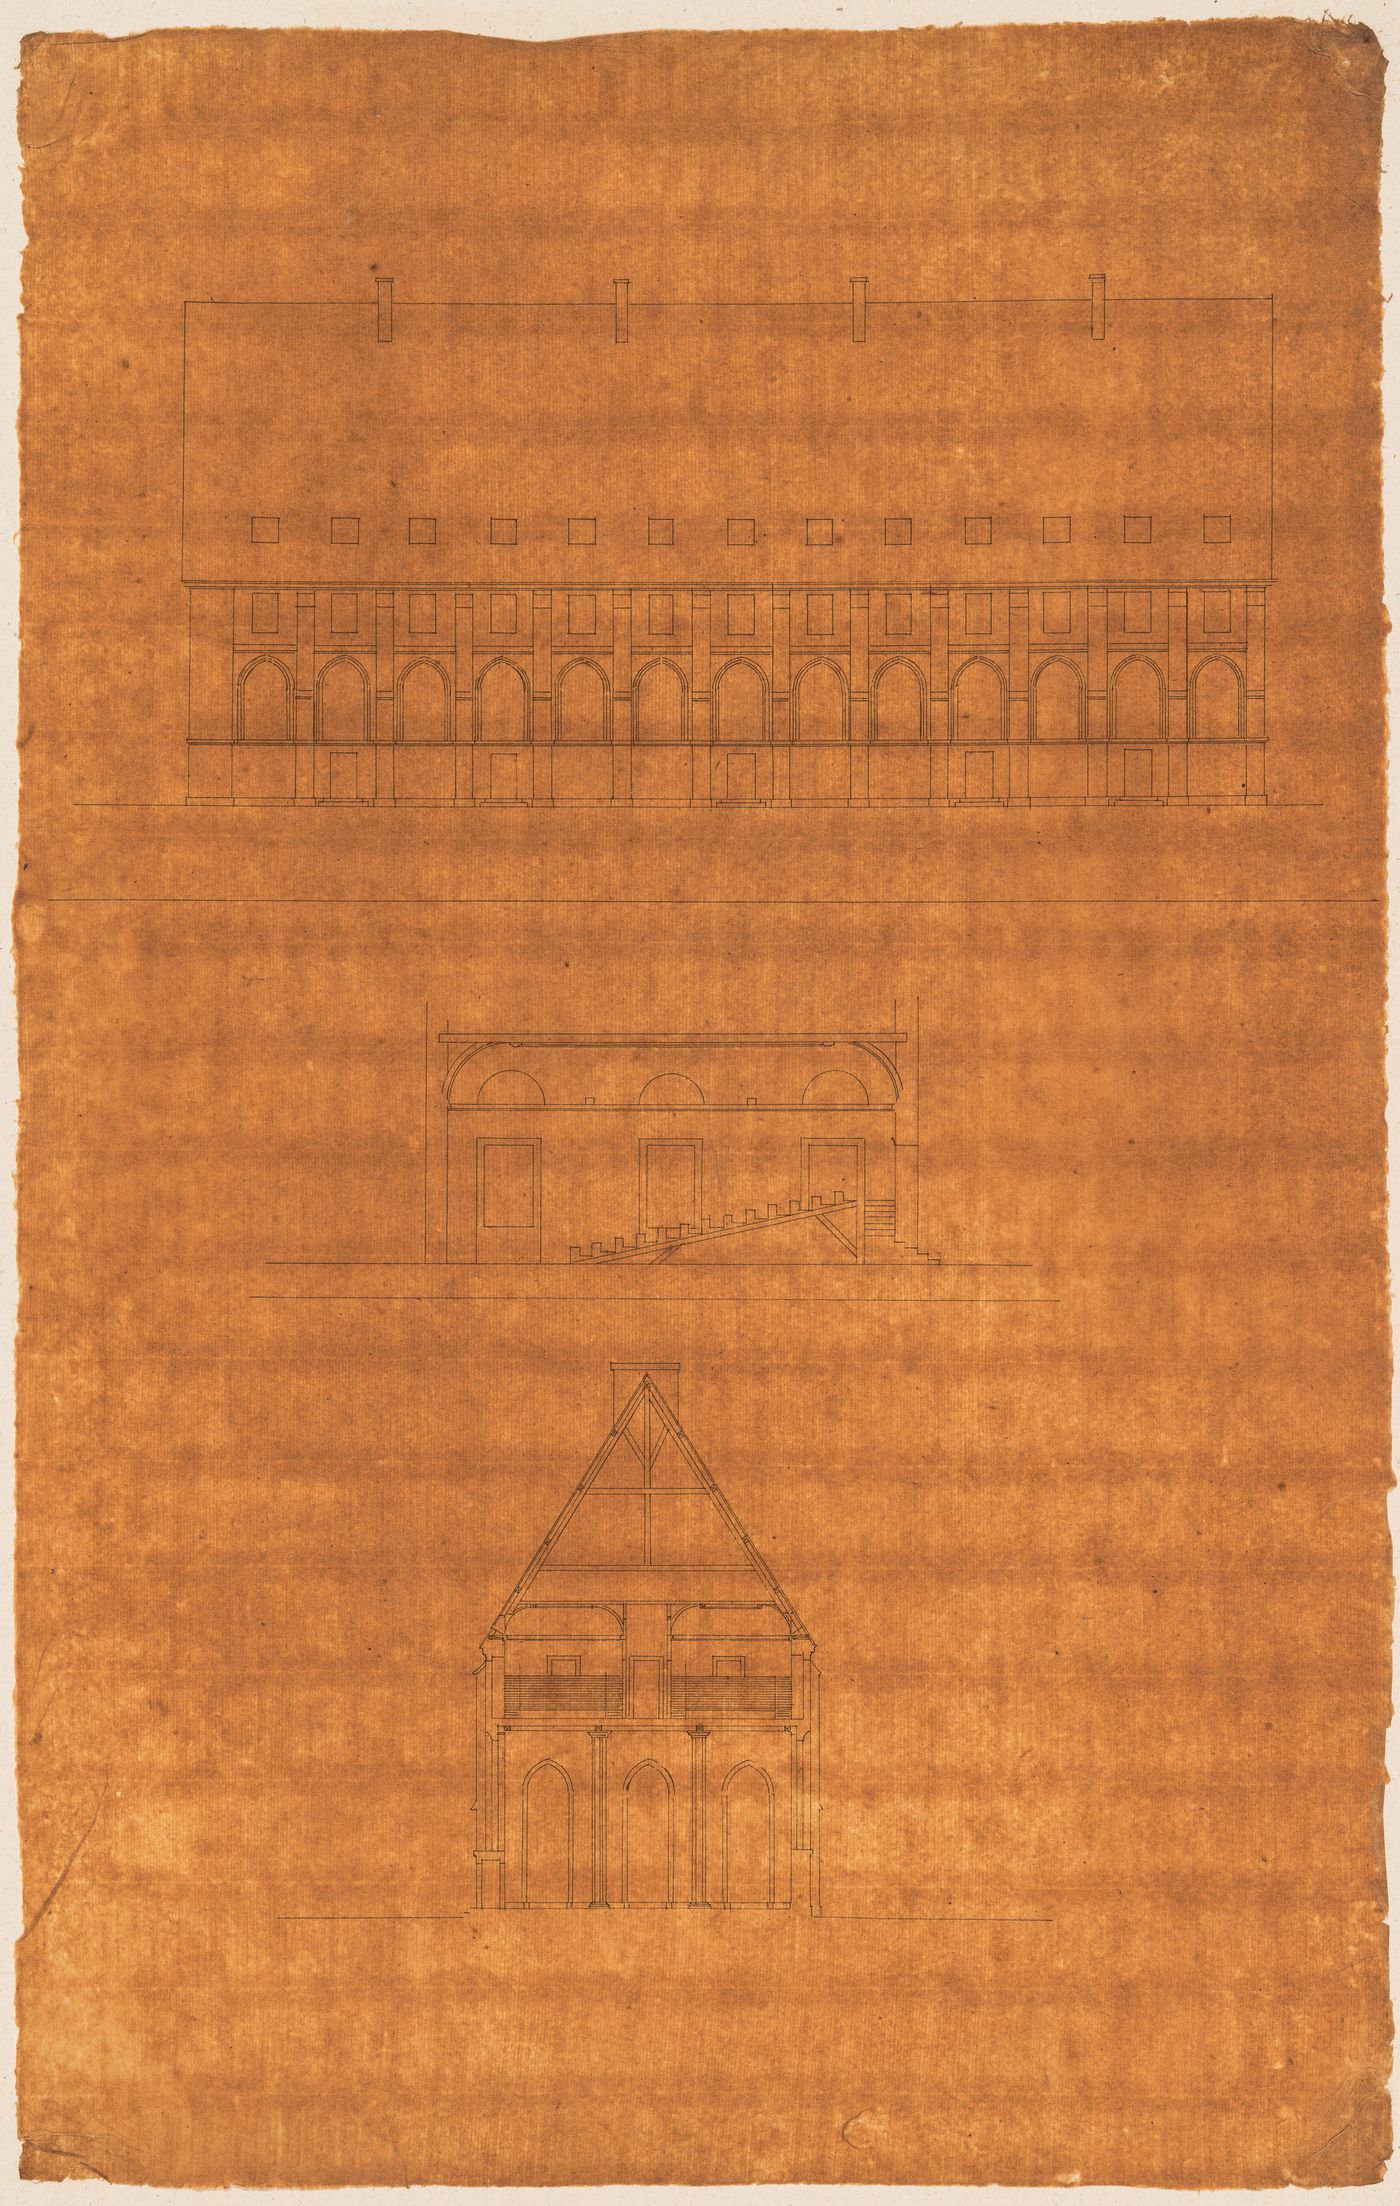 Project for the redevelopment of the École de médecine and surrounding area, Paris: Section and elevation for the salle de dissection